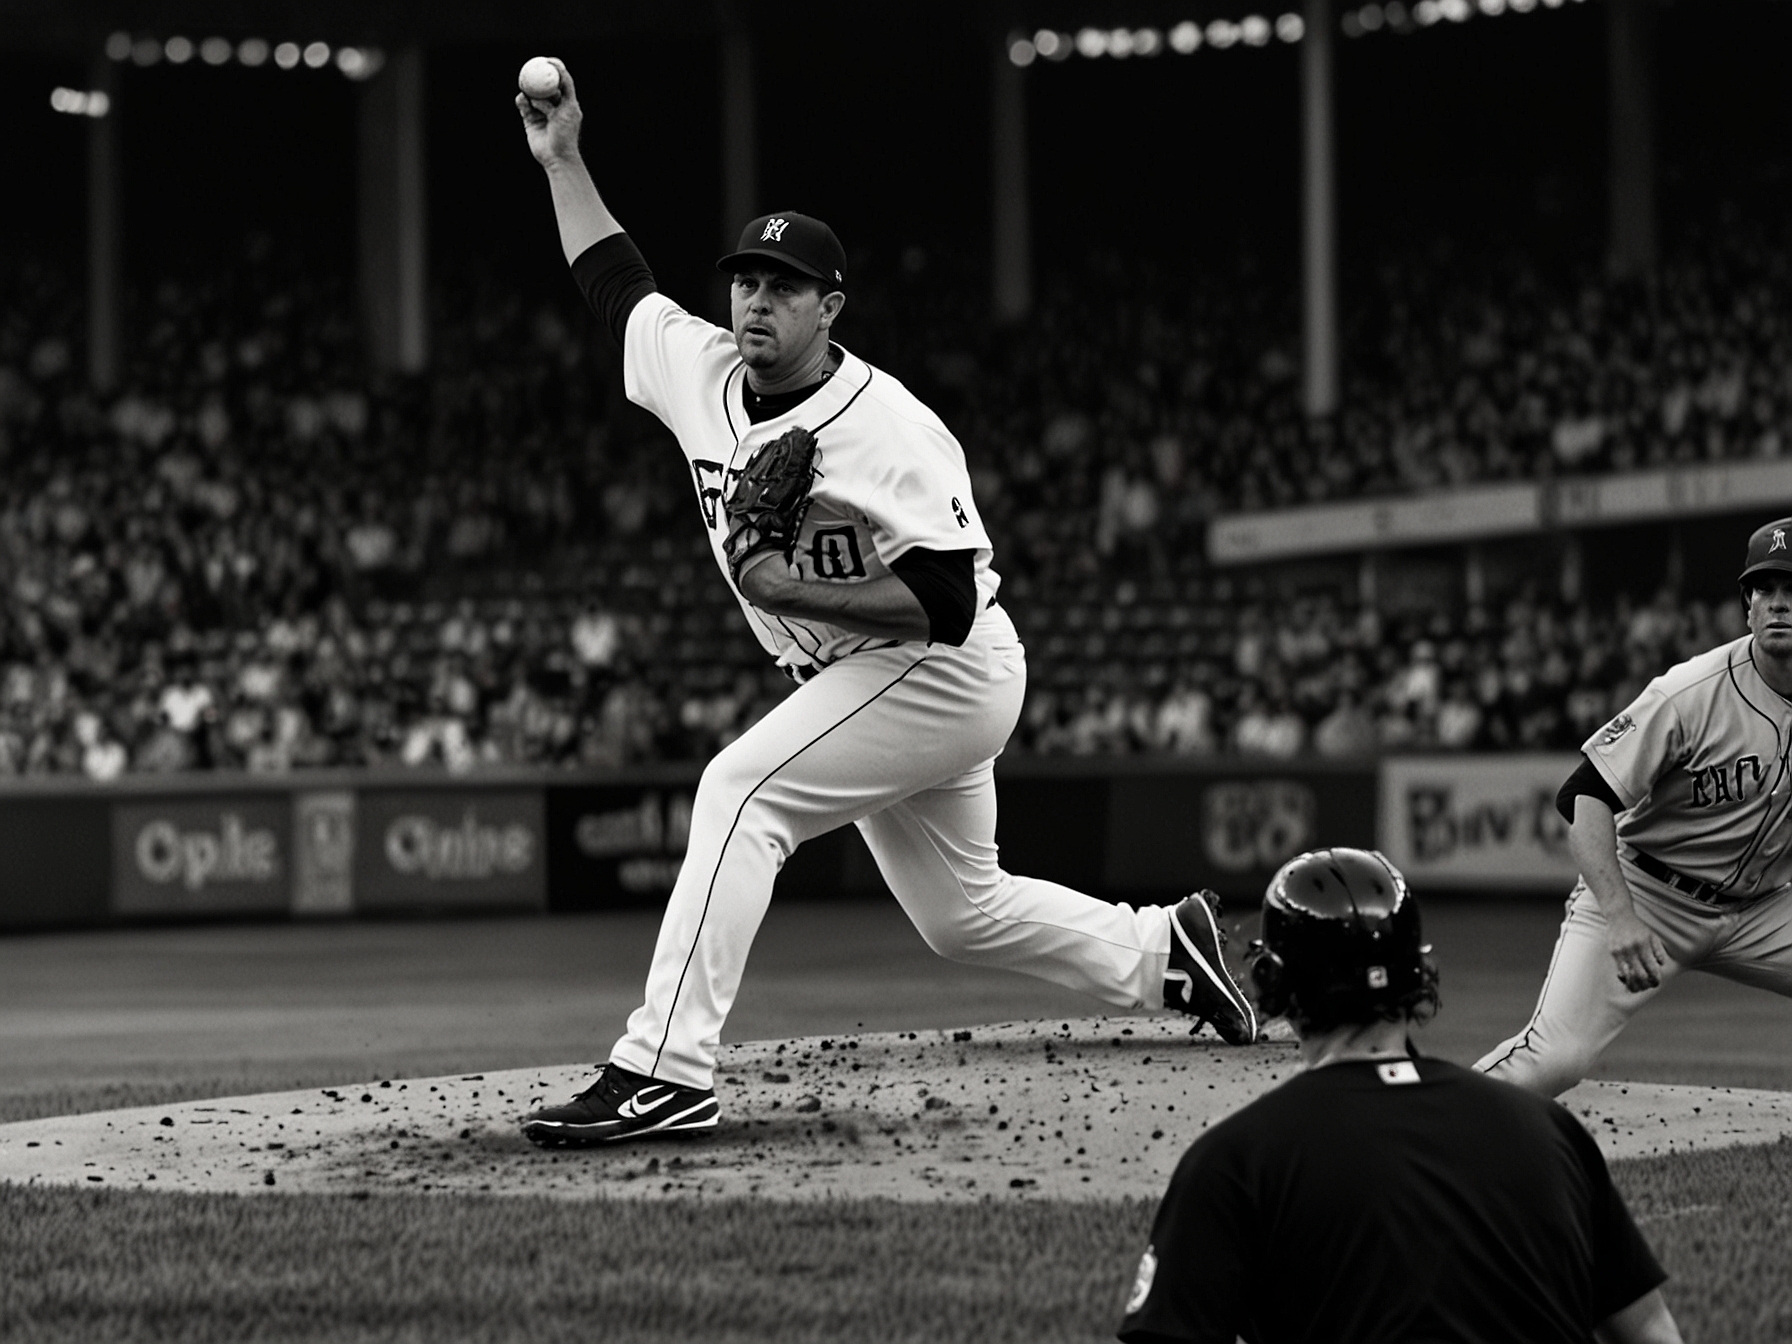 Image of Tigers' closer José Cisnero pitching in the ninth inning, maintaining composure under immense pressure to secure a narrow 7-6 victory against the Angels in a thrilling finish.